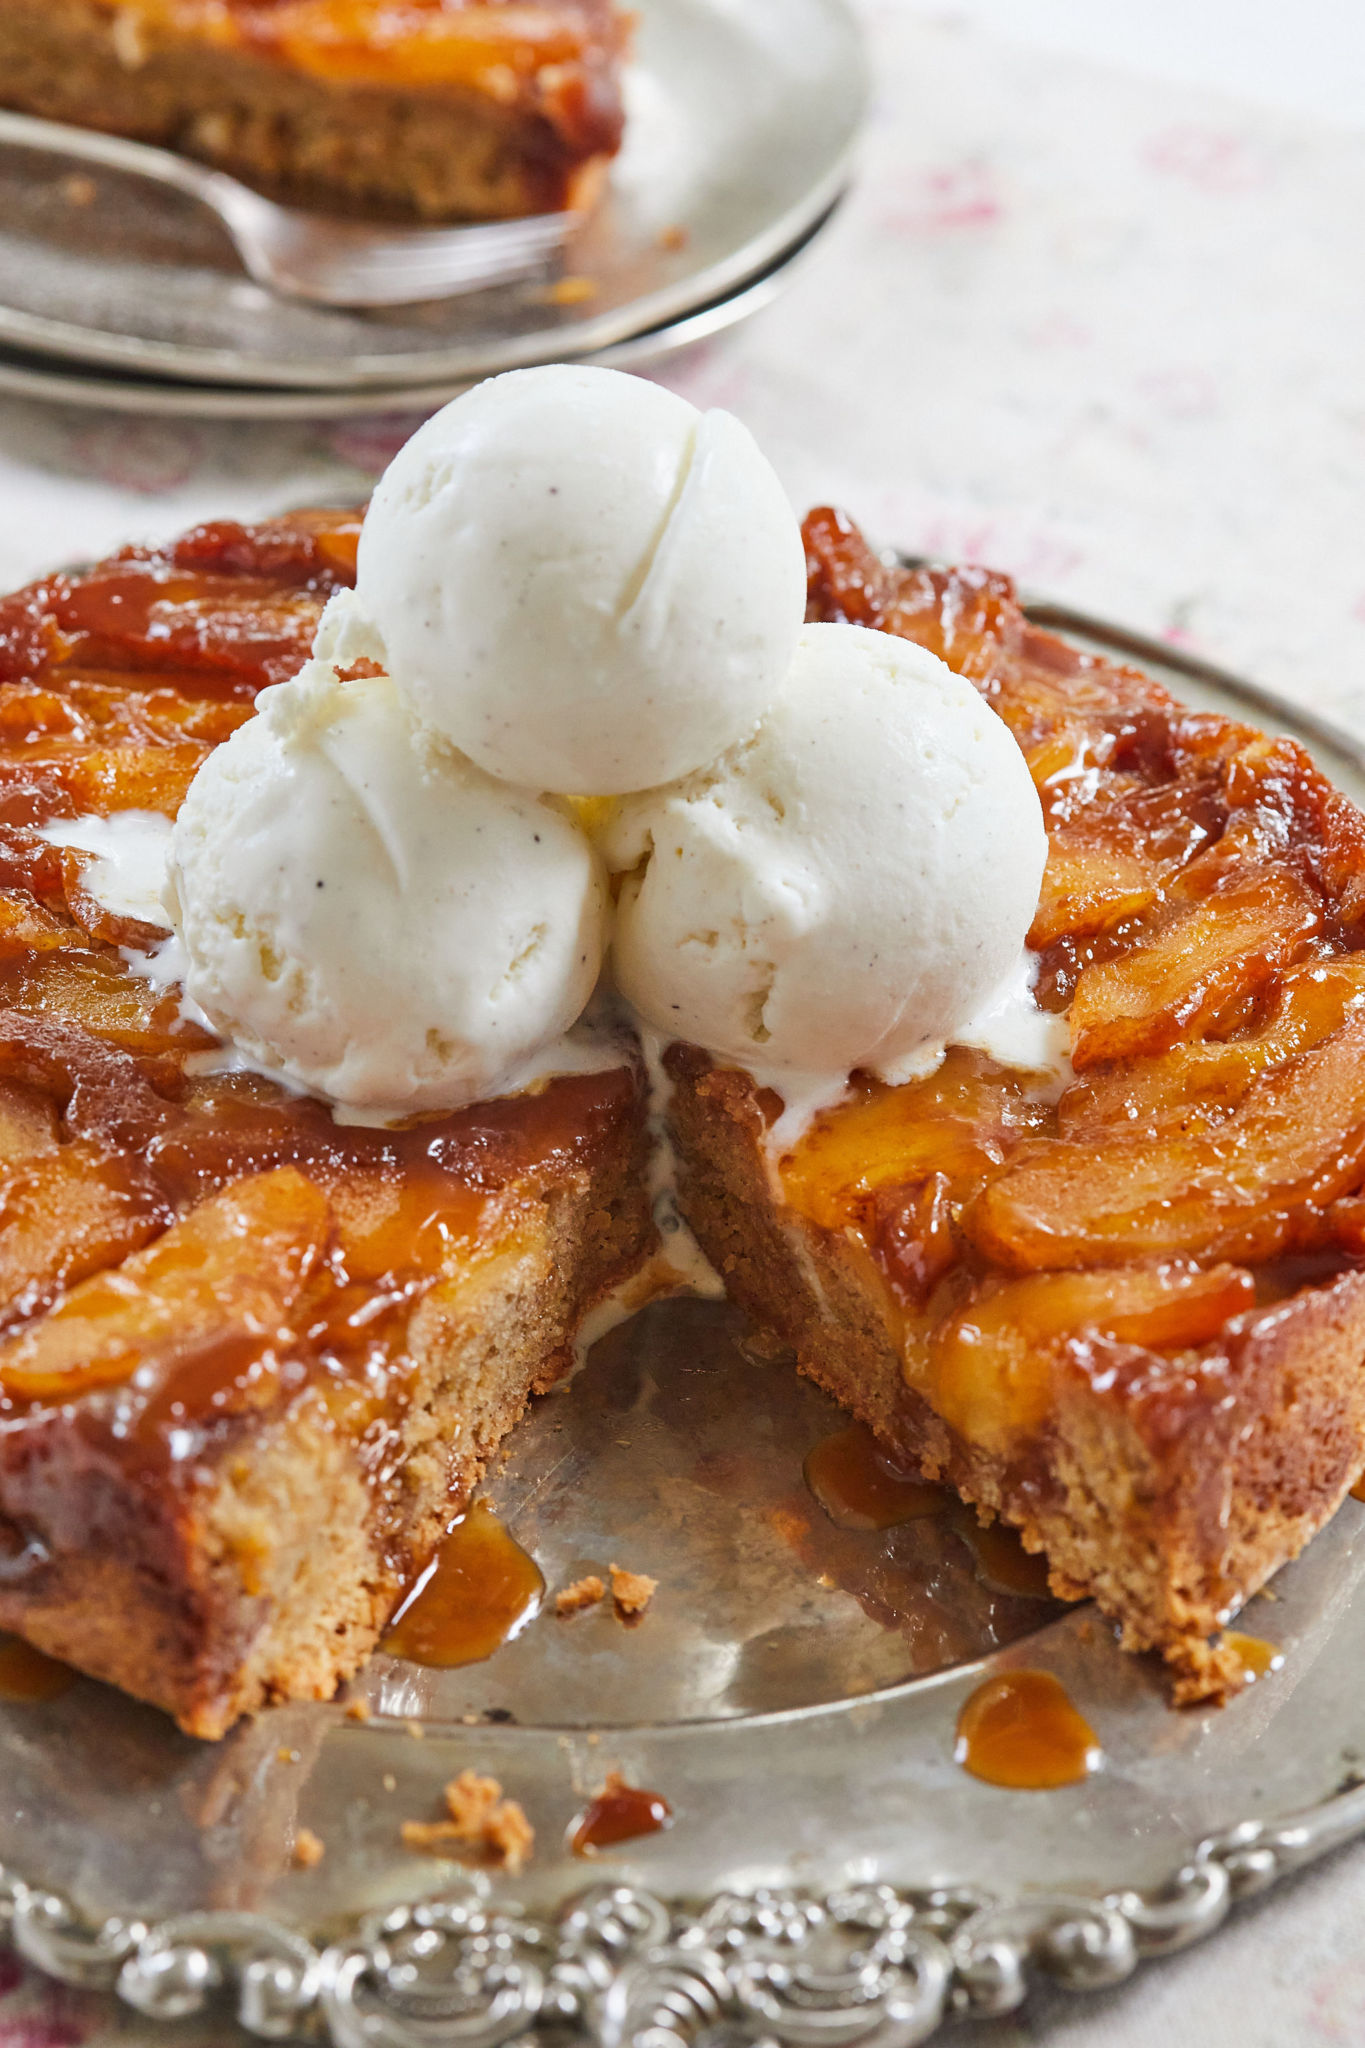 Caramel Apple Upside Down Cake with three scoops of ice cream on top.